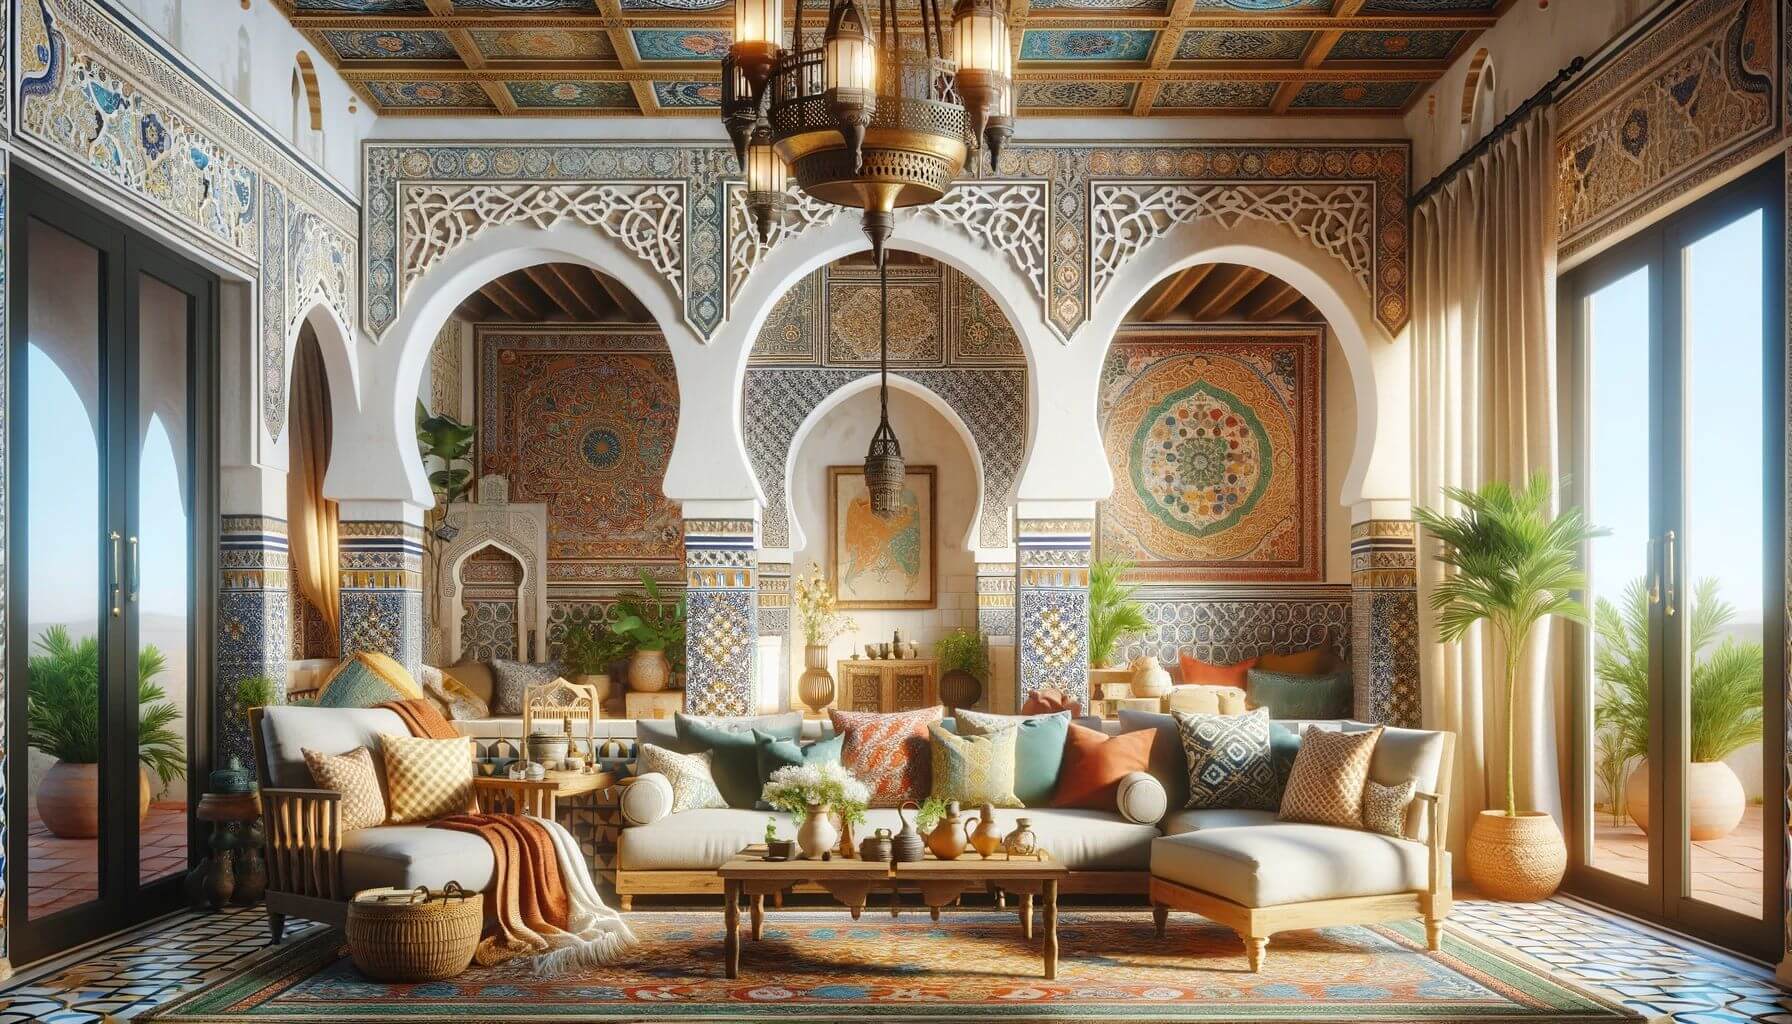 How to blend Arabic home design and Mediterranean style